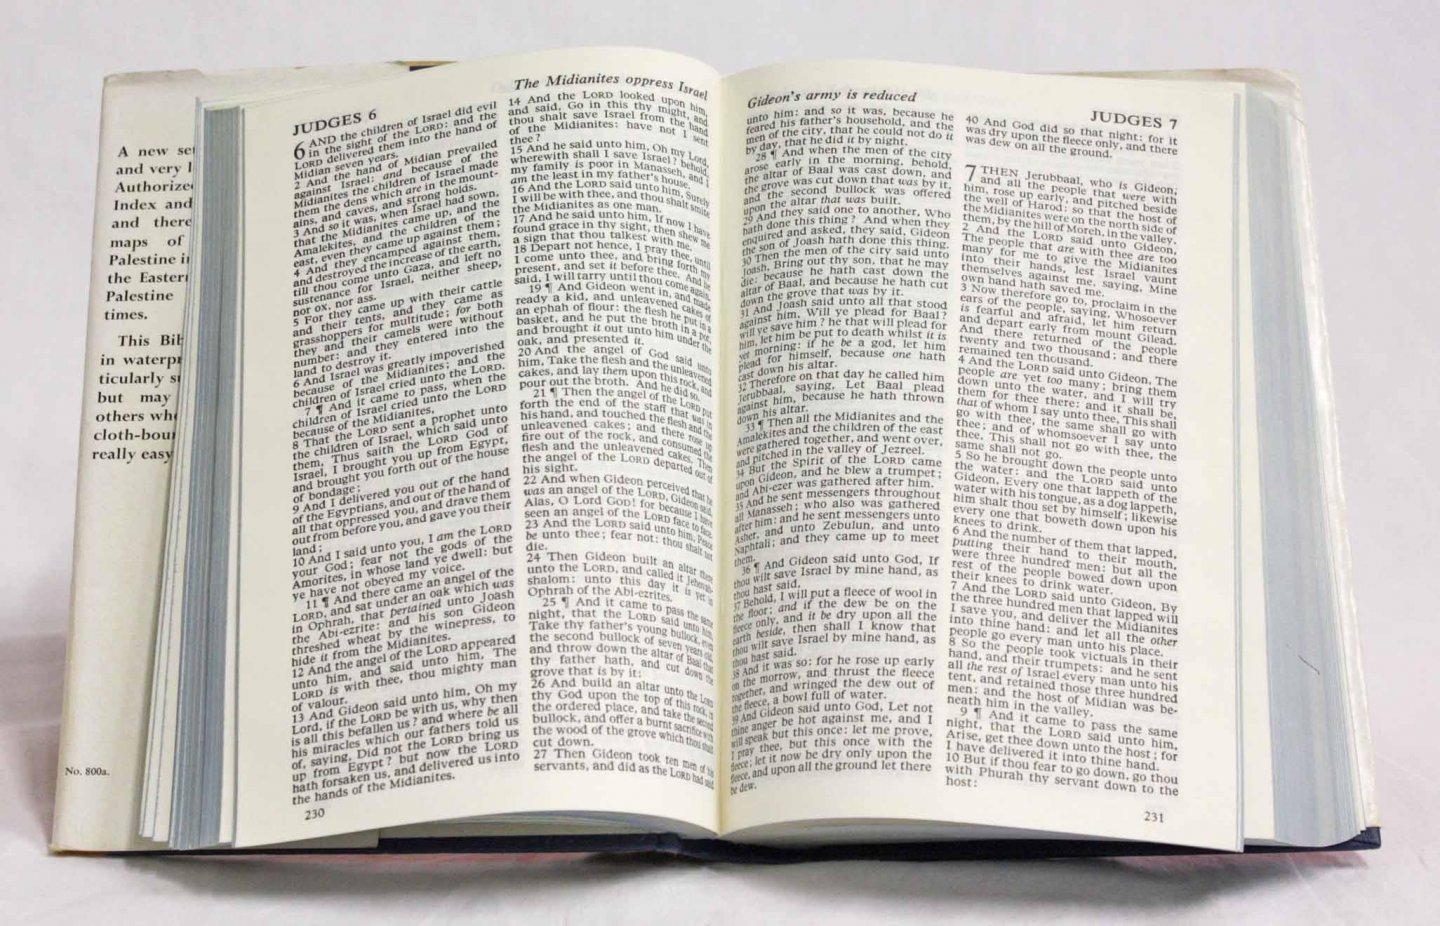 His Majesty's Special Command Crown Text; Translators of the Bible - The Holy Bible - Authorized King James Versionl; Containing The Old & New Testaments; Translated Out of the Original Tongues & with the Former Translations Diligently Compared and Revised By His Majest's Special Command -Appointed to be Read in Chur